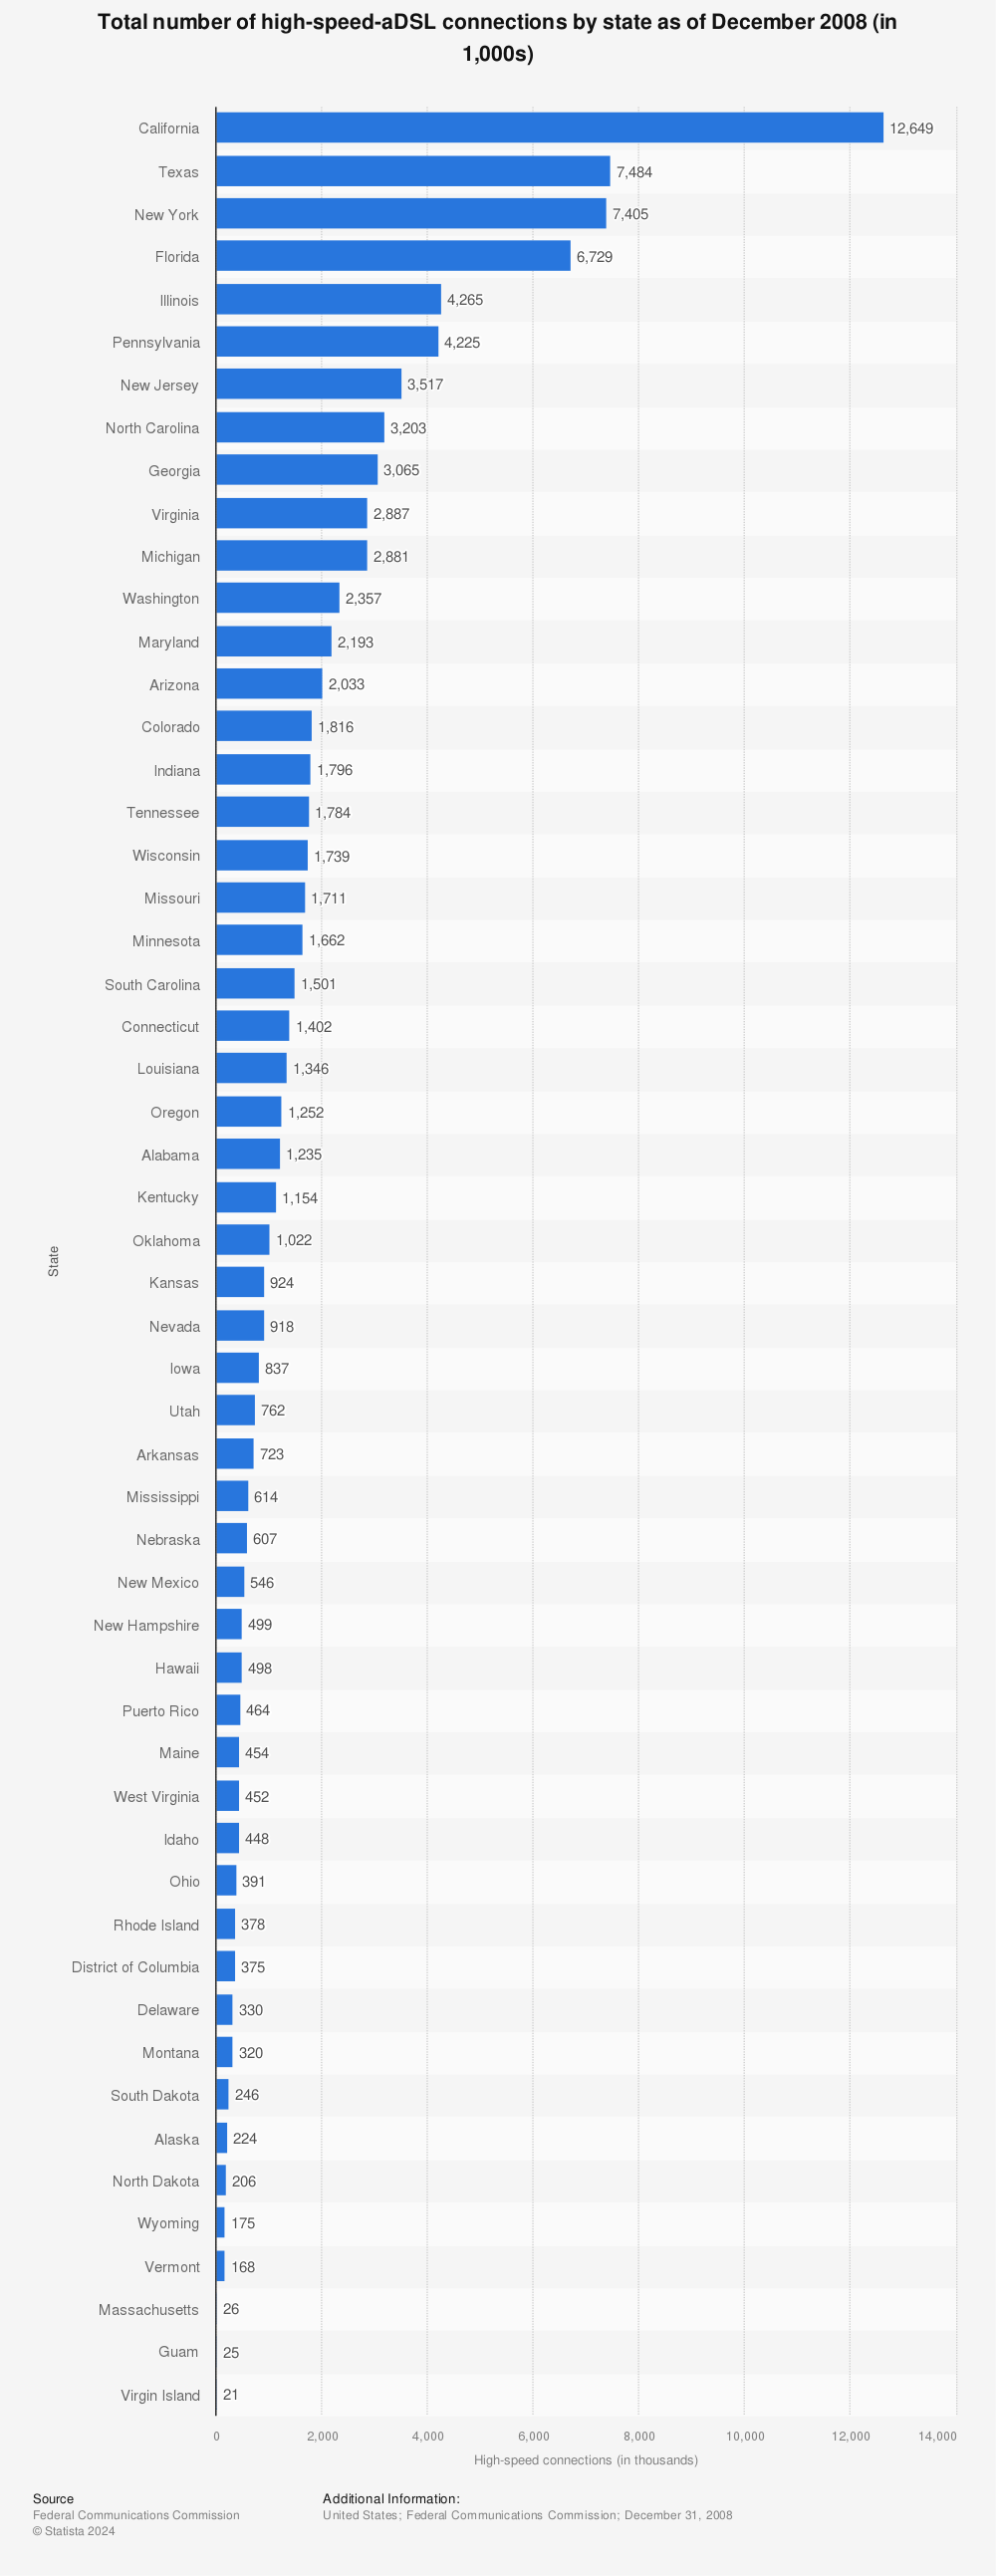 Statistic: Total number of high-speed-aDSL connections by state as of December 2008 (in 1,000s) | Statista